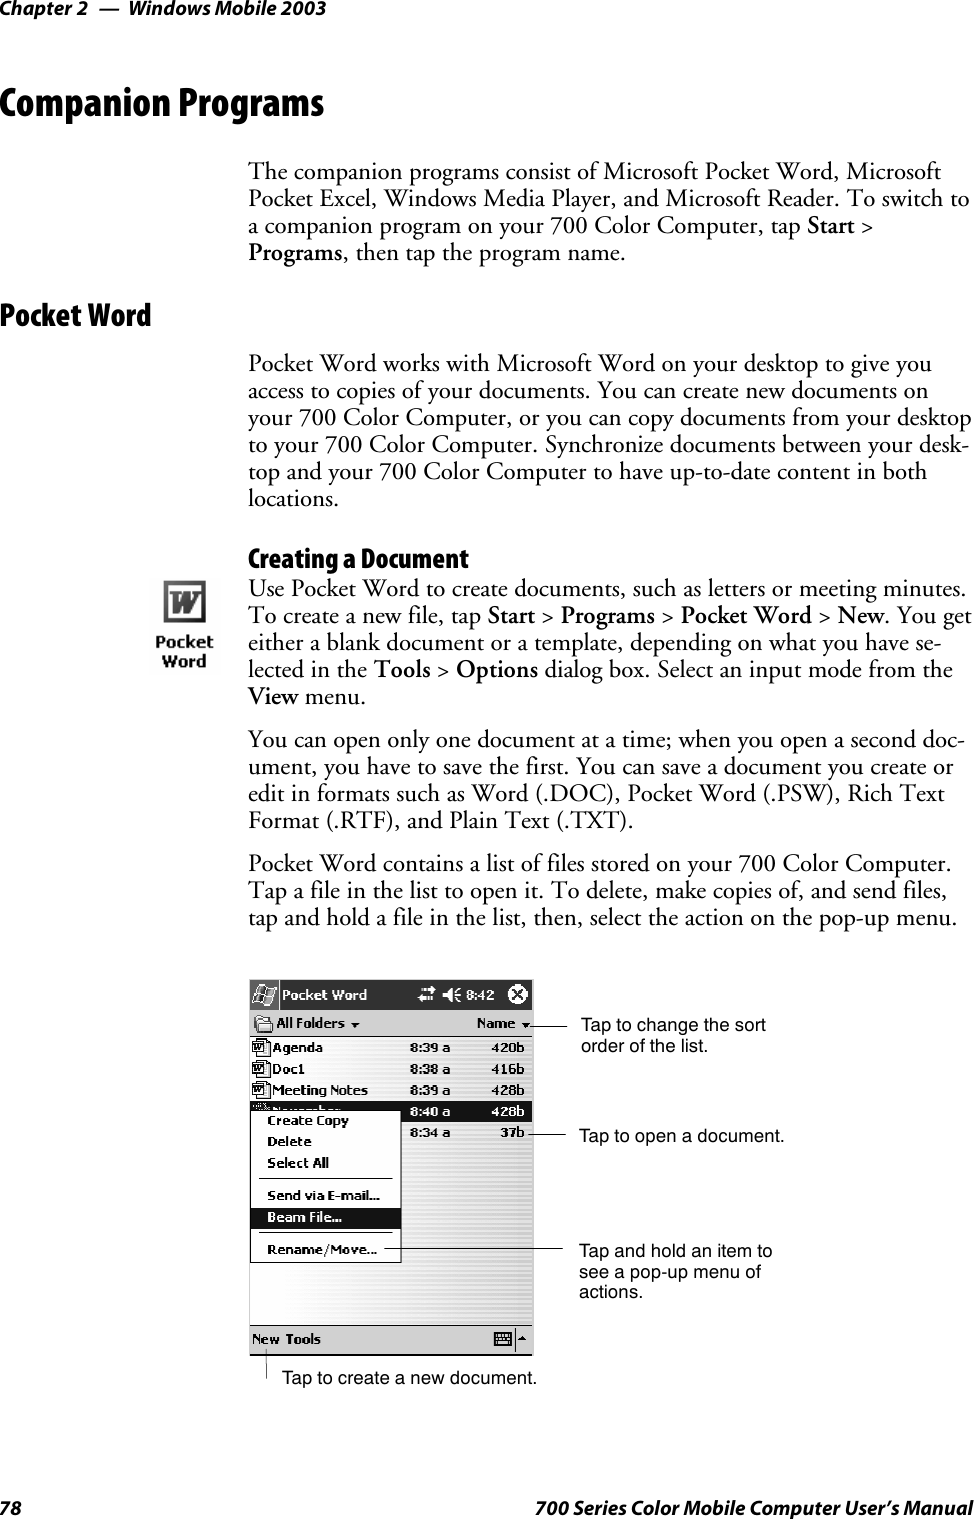 Windows Mobile 2003Chapter —278 700 Series Color Mobile Computer User’s ManualCompanion ProgramsThe companion programs consist of Microsoft Pocket Word, MicrosoftPocket Excel, Windows Media Player, and Microsoft Reader. To switch toa companion program on your 700 Color Computer, tap Start &gt;Programs, then tap the program name.Pocket WordPocket Word works with Microsoft Word on your desktop to give youaccess to copies of your documents. You can create new documents onyour 700 Color Computer, or you can copy documents from your desktopto your 700 Color Computer. Synchronize documents between your desk-top and your 700 Color Computer to have up-to-date content in bothlocations.Creating a DocumentUse Pocket Word to create documents, such as letters or meeting minutes.To create a new file, tap Start &gt;Programs &gt;Pocket Word &gt;New. You geteither a blank document or a template, depending on what you have se-lected in the Tools &gt;Options dialog box. Select an input mode from theView menu.You can open only one document at a time; when you open a second doc-ument, you have to save the first. You can save a document you create oredit in formats such as Word (.DOC), Pocket Word (.PSW), Rich TextFormat (.RTF), and Plain Text (.TXT).Pocket Word contains a list of files stored on your 700 Color Computer.Tap a file in the list to open it. To delete, make copies of, and send files,tap and hold a file in the list, then, select the action on the pop-up menu.Tap to change the sortorder of the list.Tap to create a new document.Tap to open a document.Tap and hold an item tosee a pop-up menu ofactions.